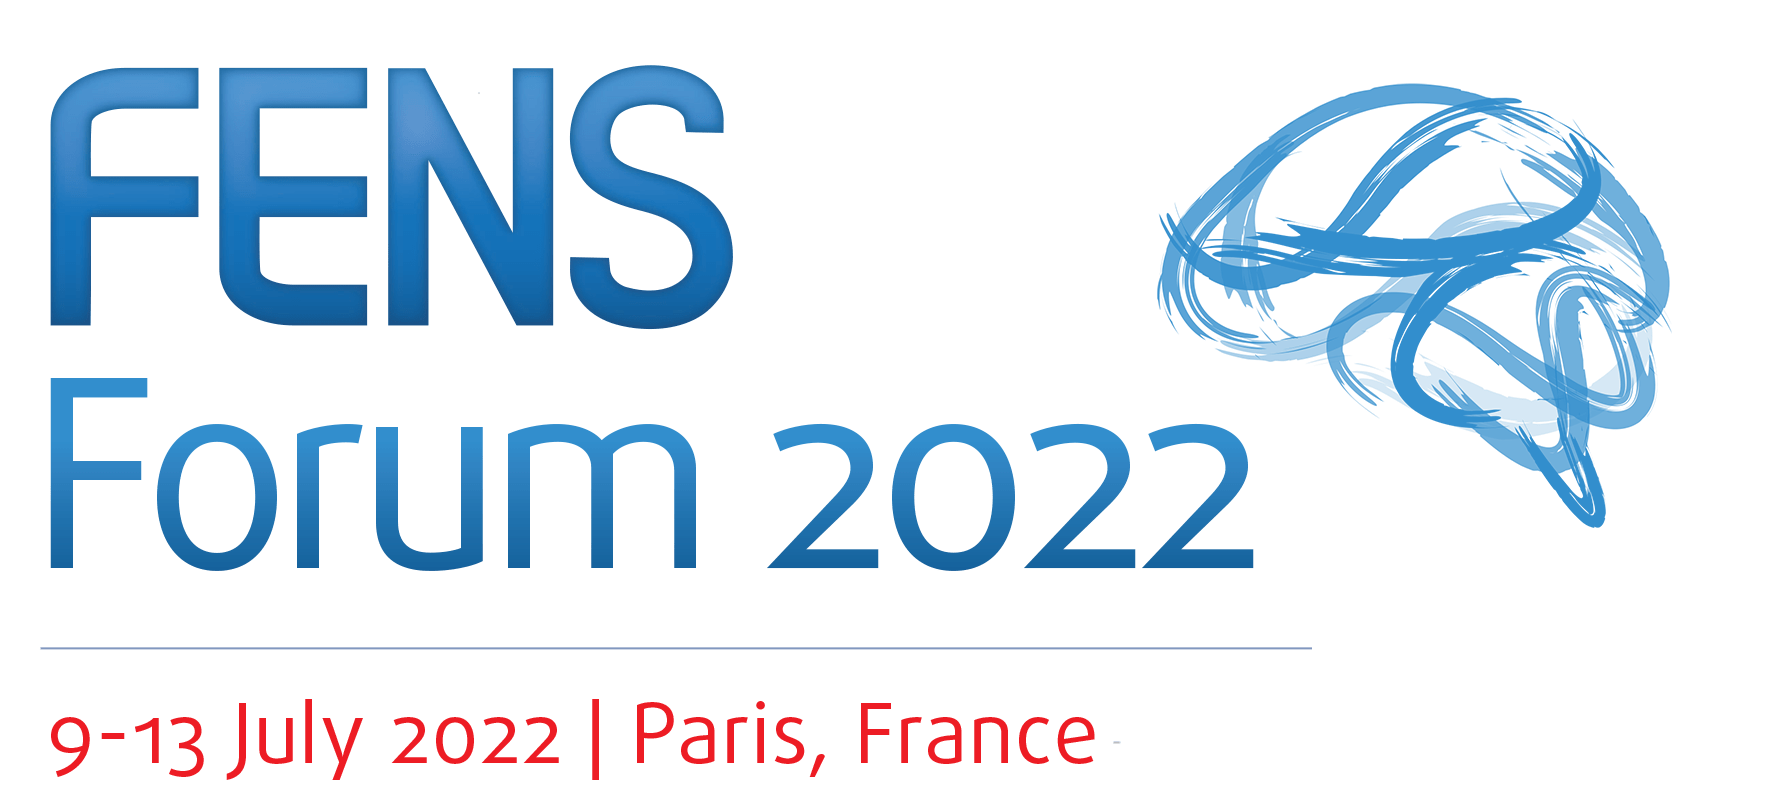 Awards and Prizes - FENS 2022 - International Neuroscience Conference